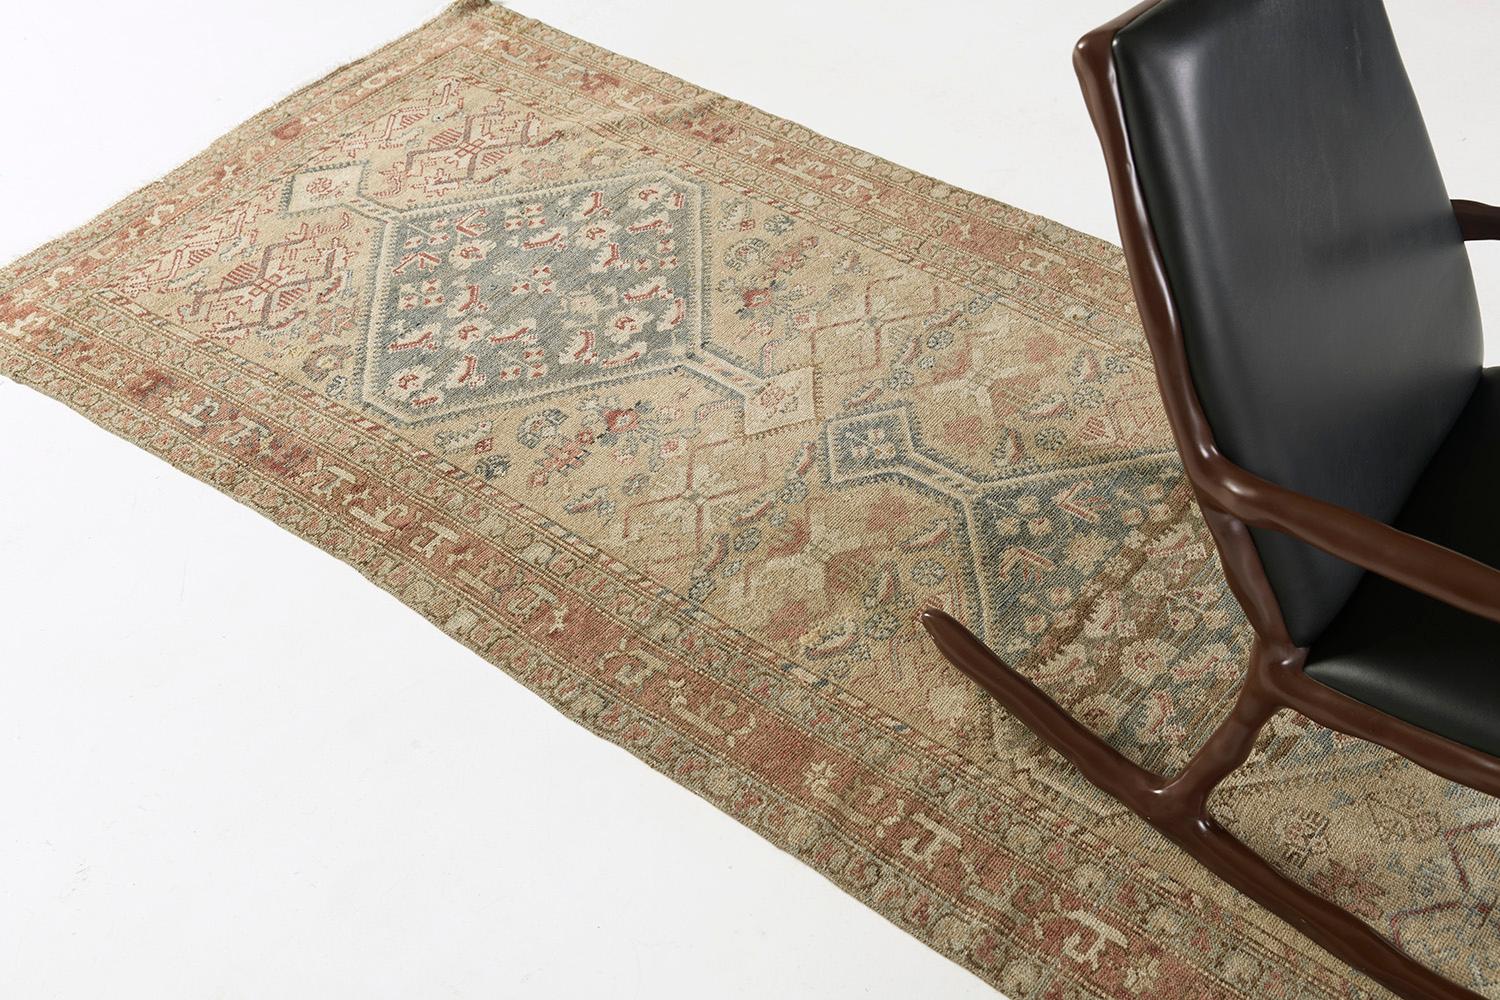 Behold and grab a glance at the charm of the Persian Malayer from our sought-after antique collection. Majestic neutral tones feature the outline details of Persian symbols with red and blue accents. Elegant medallions are aligned at the center that